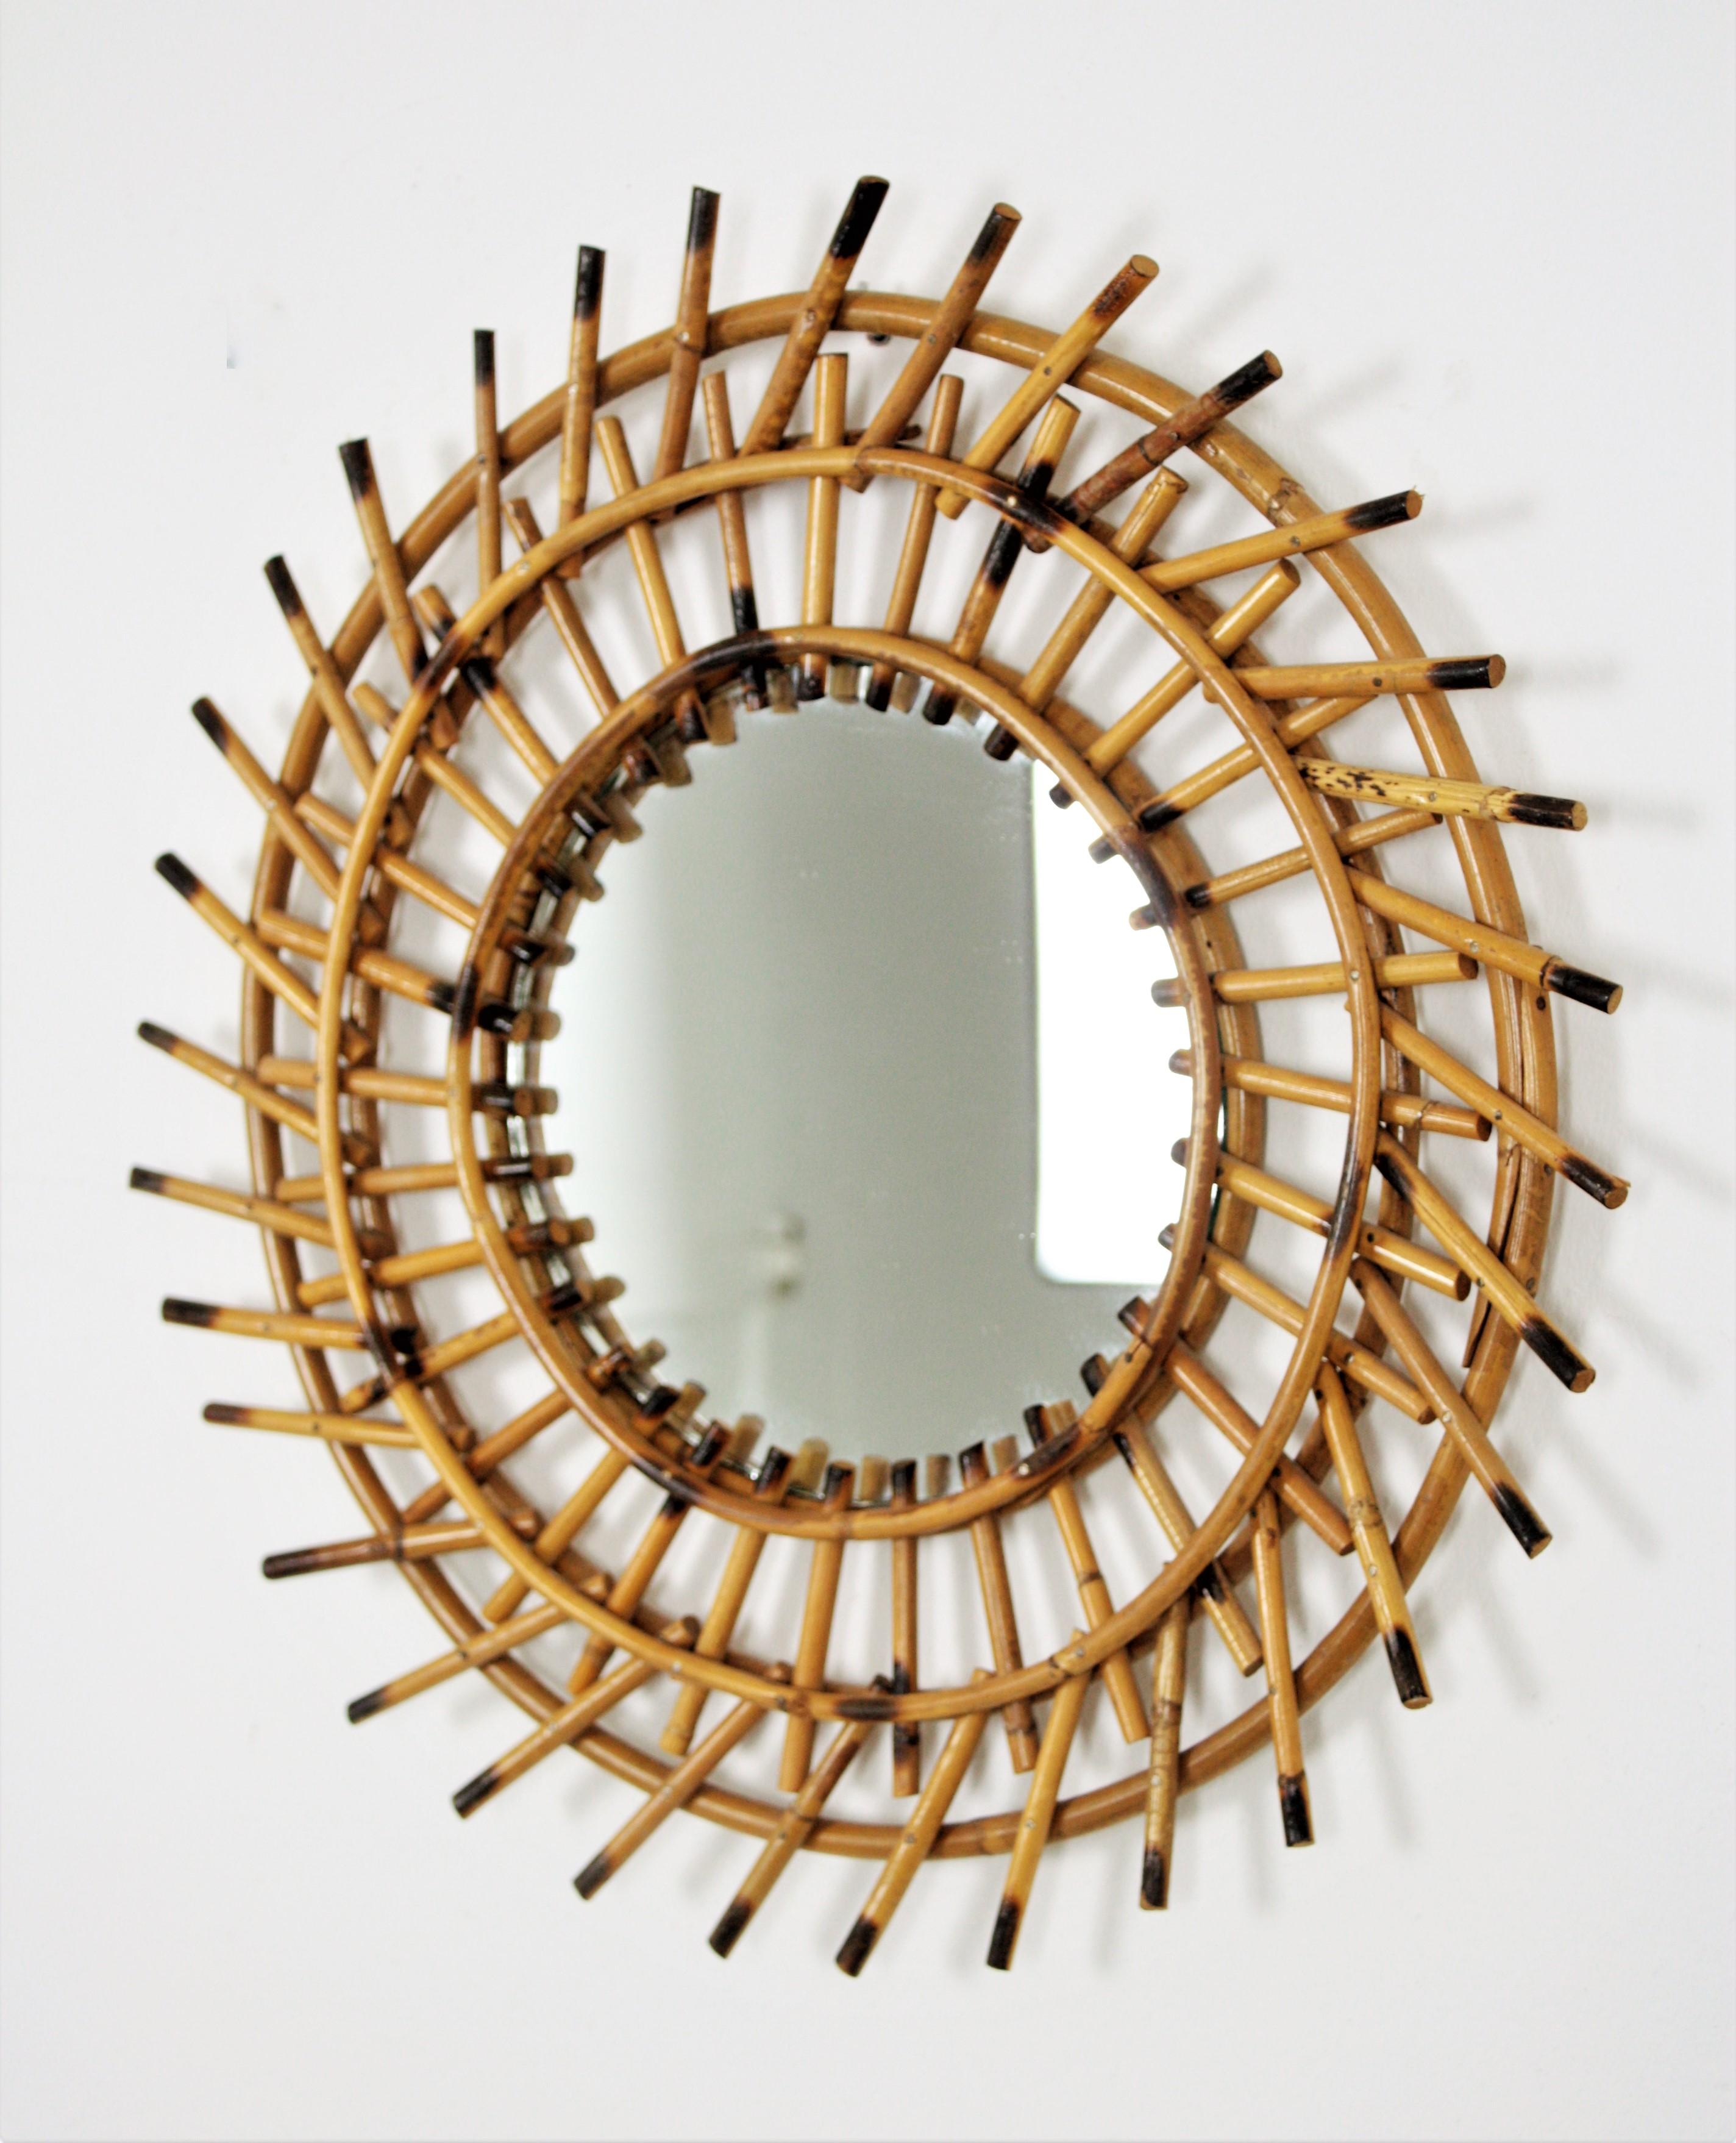 Rattan sunburst twisted mirror, France, 1960s.
Eye-catching double layered sunburst mirror with twisting accents on the frame.
This handcrafted mirror will be a nice addition to a beach house, countryside decoration or urban appartment. A cool